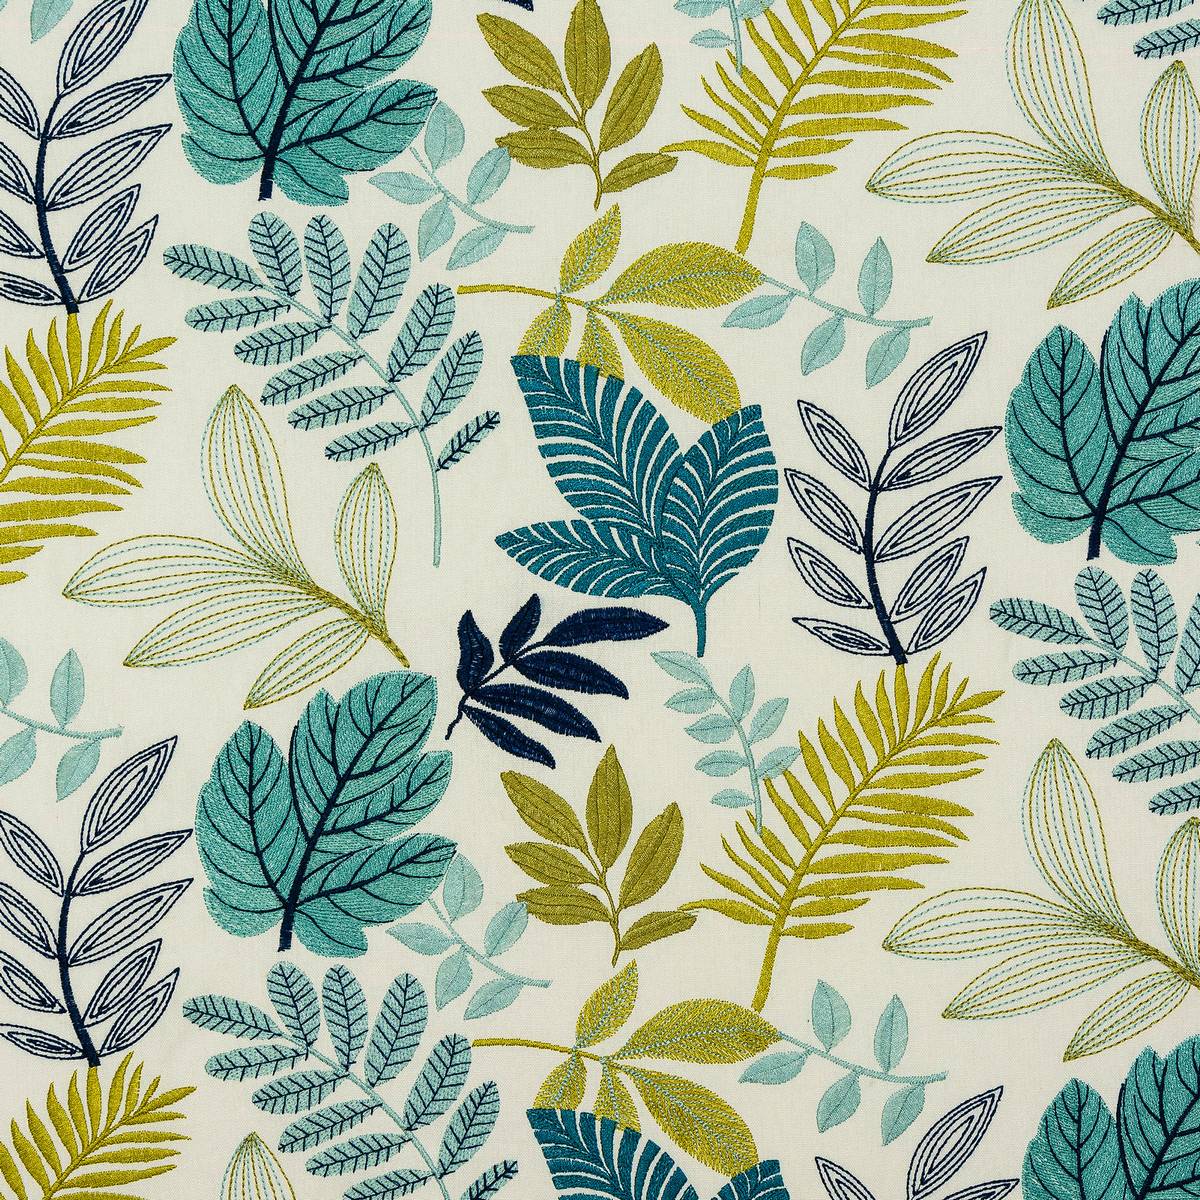 Heligan Teal Fabric by Porter & Stone